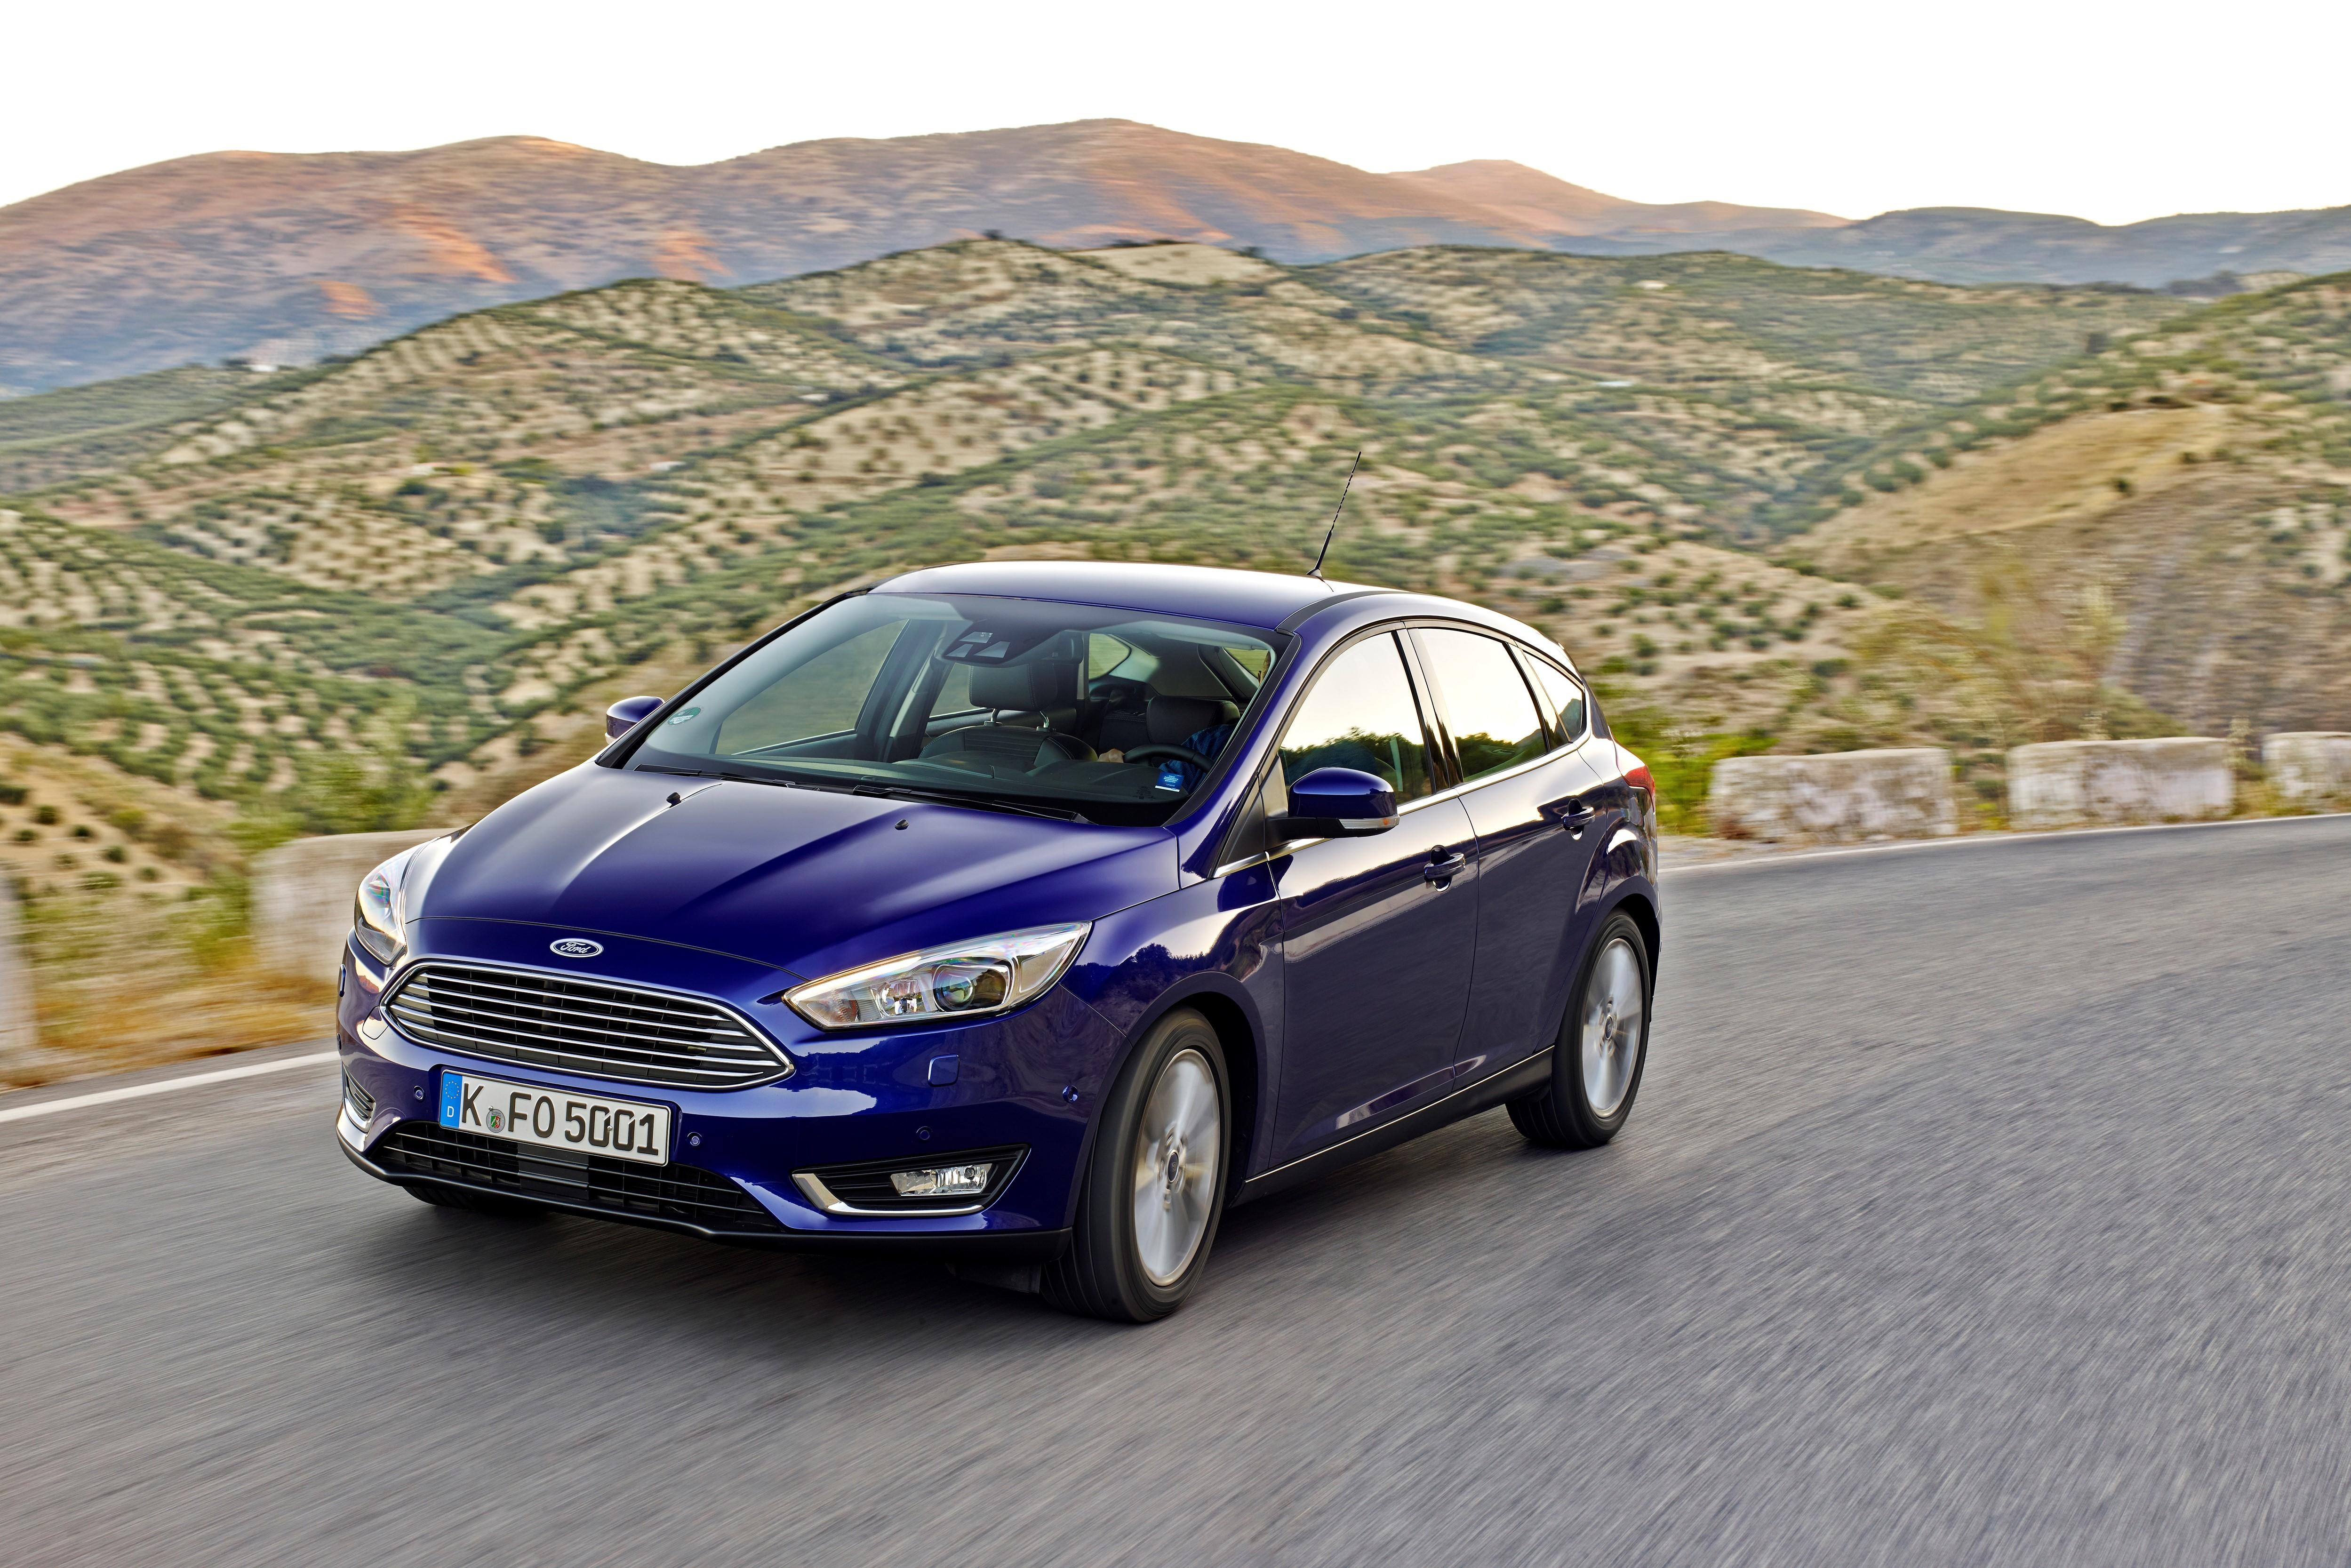 Ford Focus 2015. Форд фокус 3 2015. Форд фокус 3 2014. Форд фокус 4 2014. Машина 2015 года выпуска